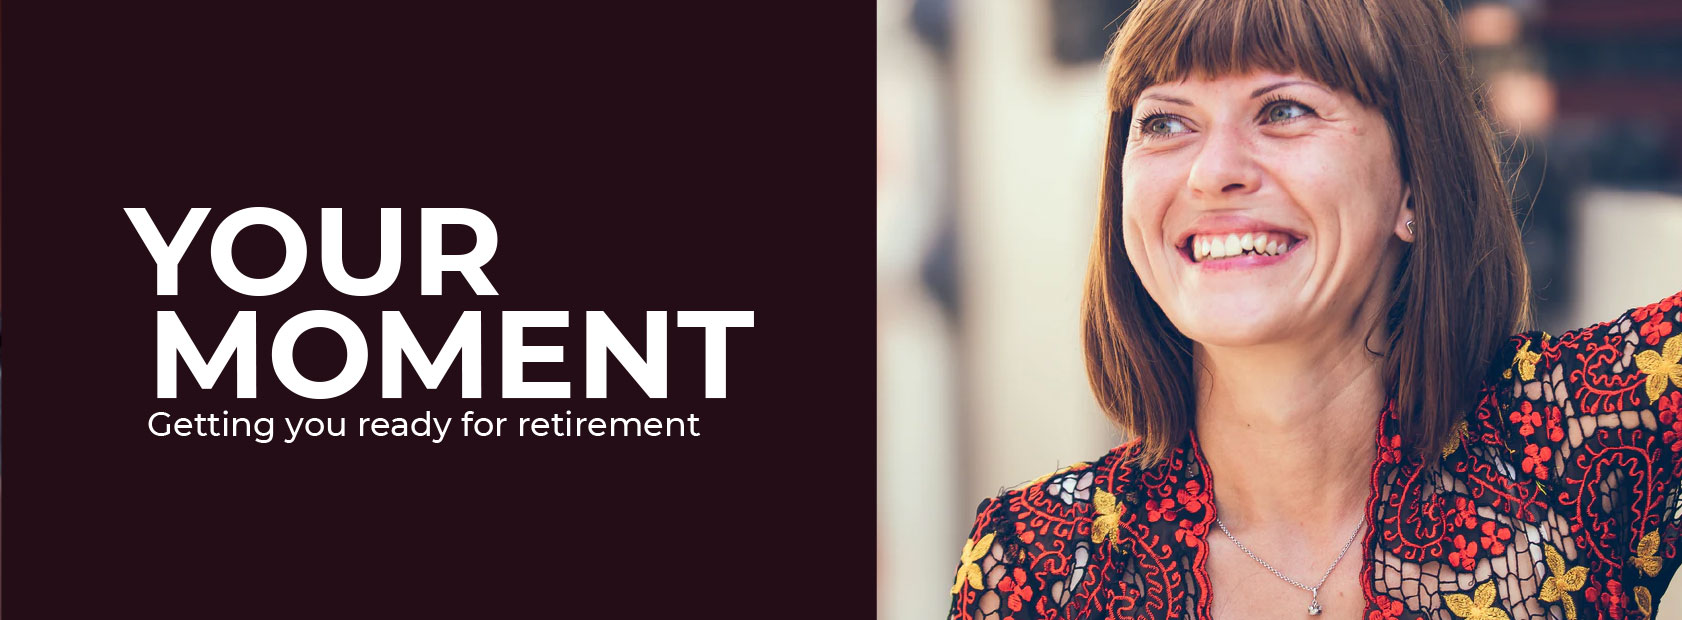 Your Moment campaign image of woman smiling